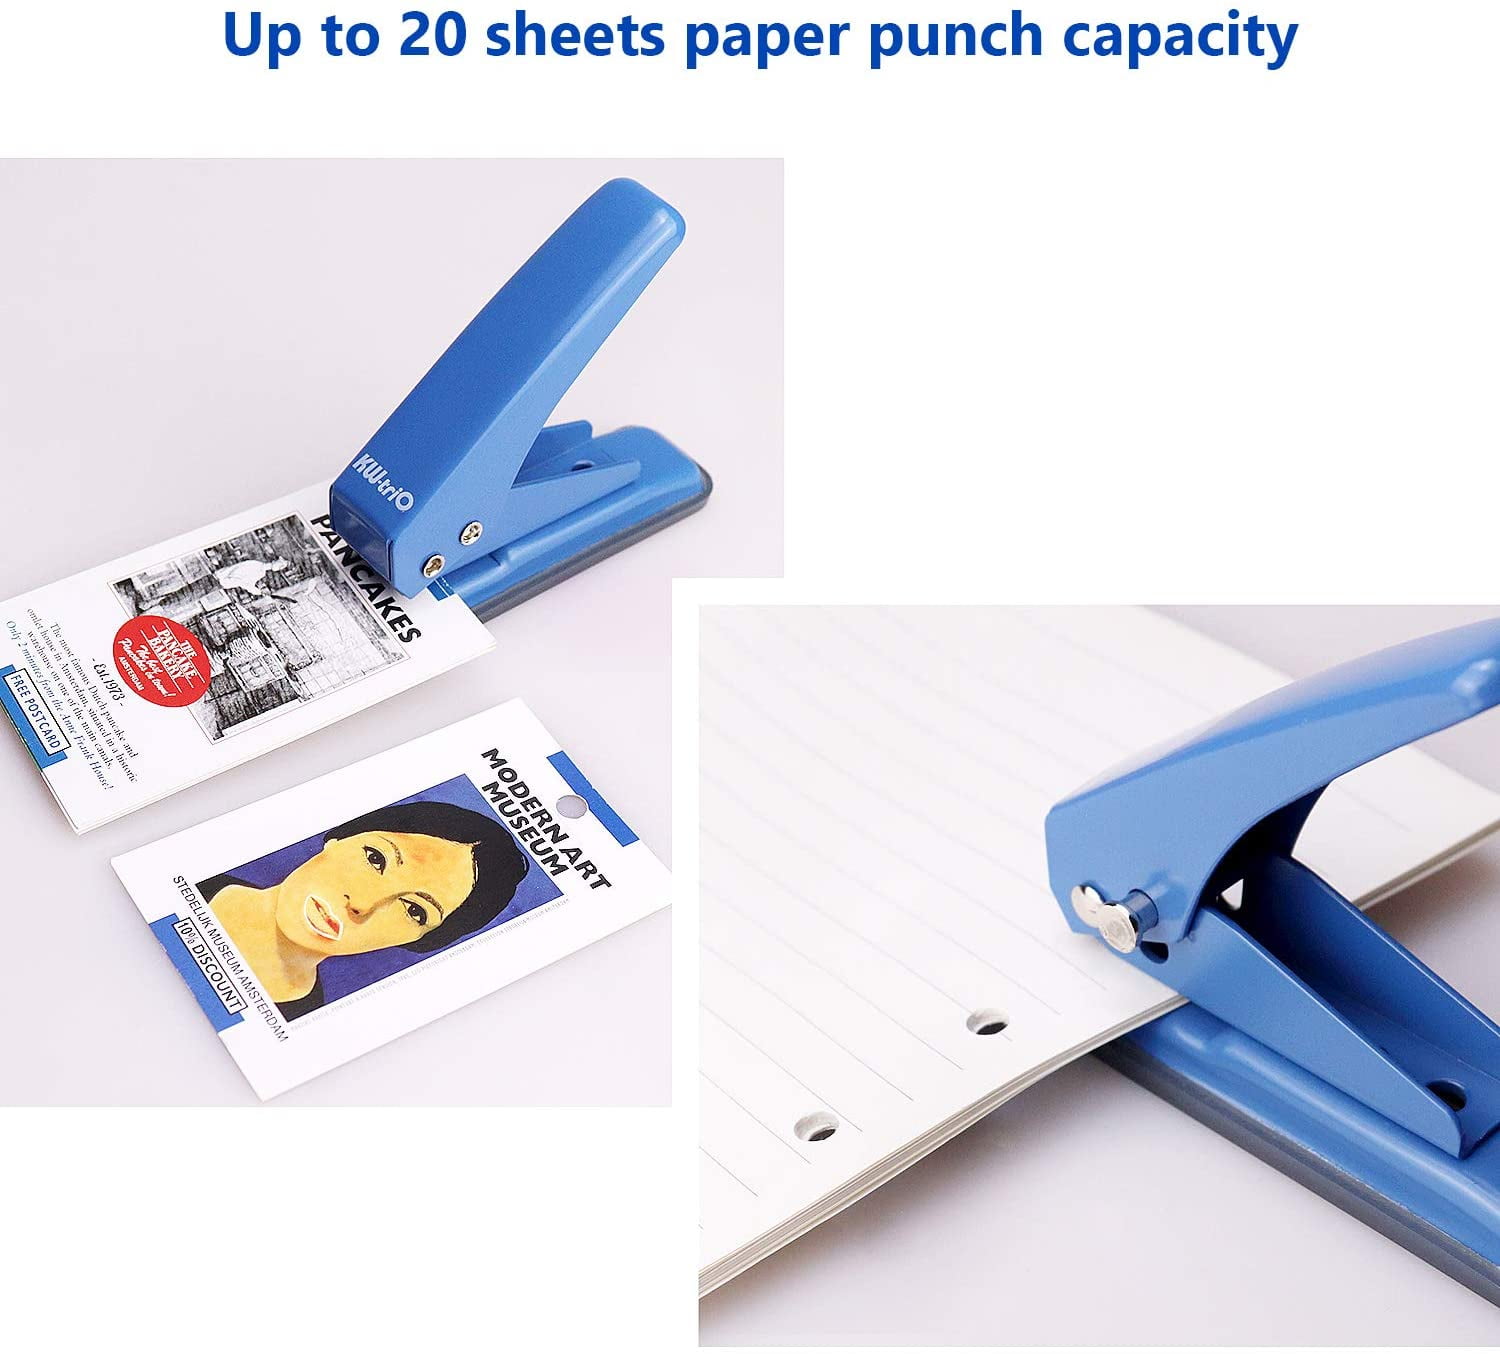 OIAGLH Kw-trio Single Hole Punch,Heavy Duty Paper Hole Punch, 20 Sheet Punch Capacity, Hand Craft Hole Puncher for Paper Art Project